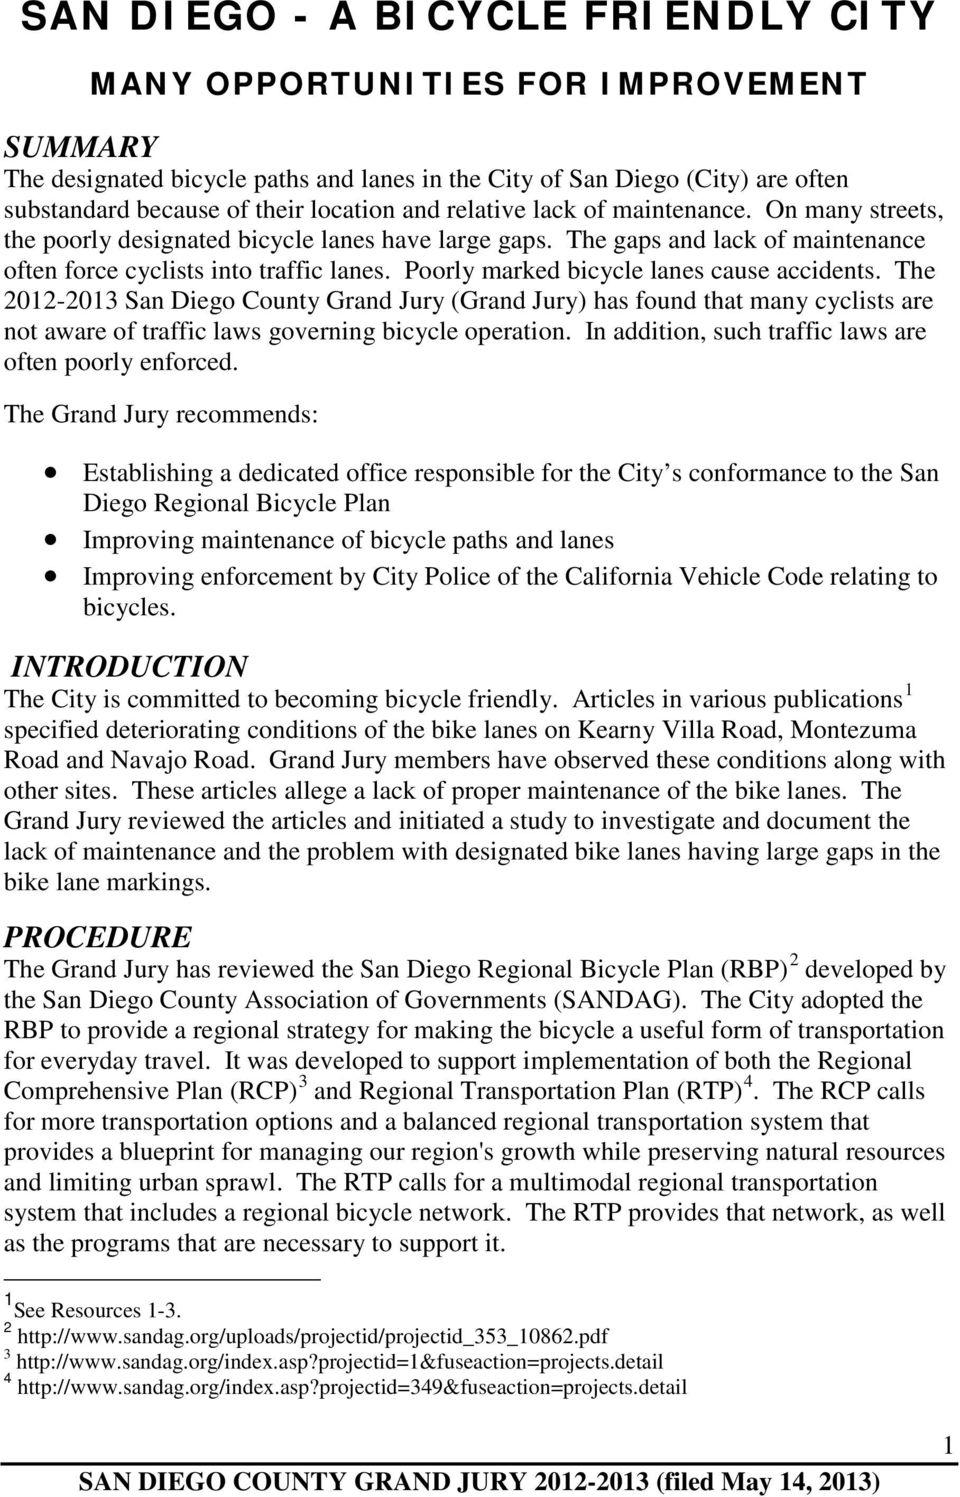 Poorly marked bicycle lanes cause accidents. The 2012-2013 San Diego County Grand Jury (Grand Jury) has found that many cyclists are not aware of traffic laws governing bicycle operation.